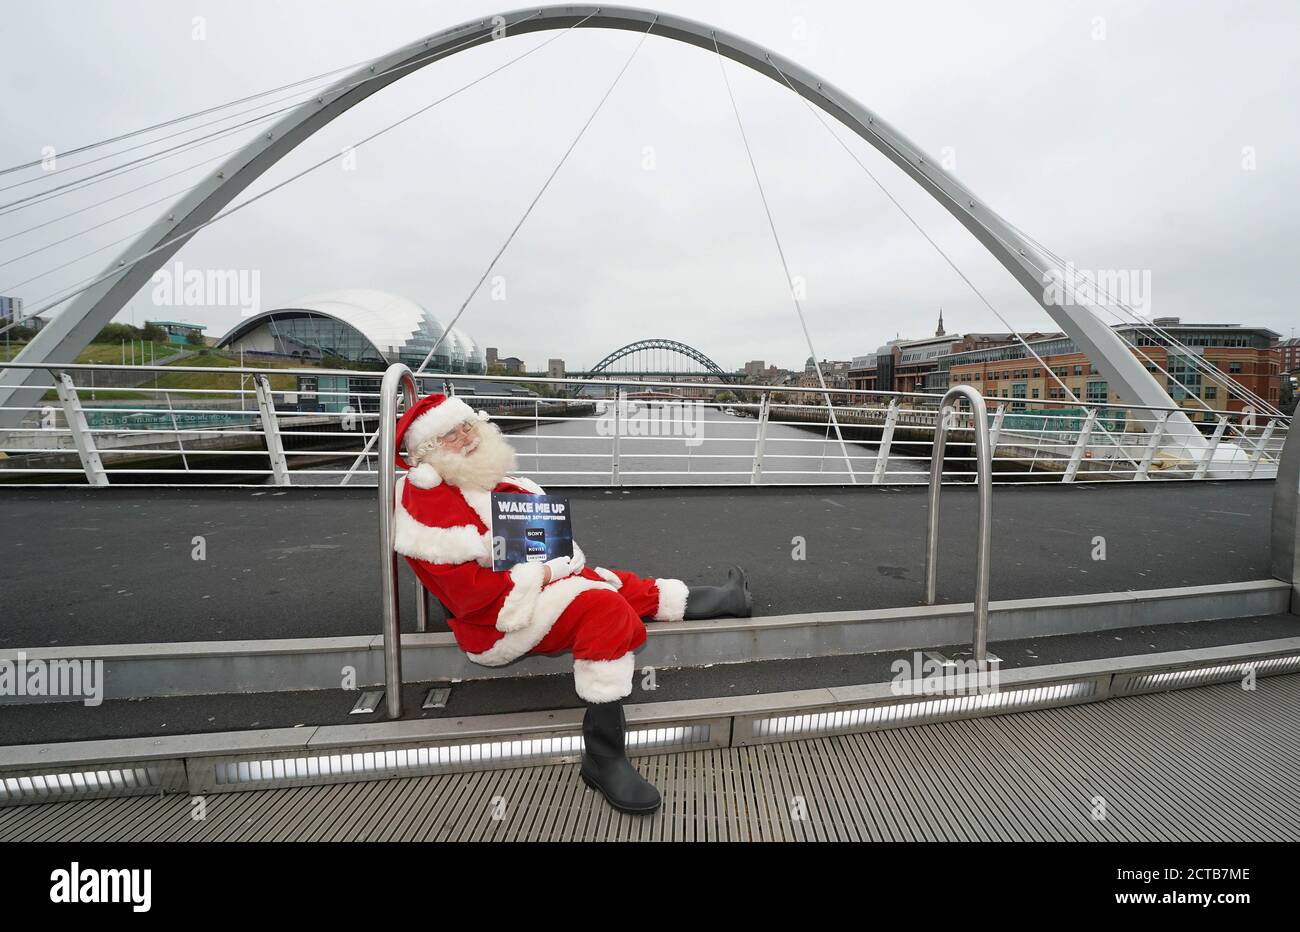 A man dressed as Santa Clause asks passers-by in Newcastle to 'wake him up' in time for the launch of the Sony Movies Christmas television channel, which goes live on September 24th. Stock Photo